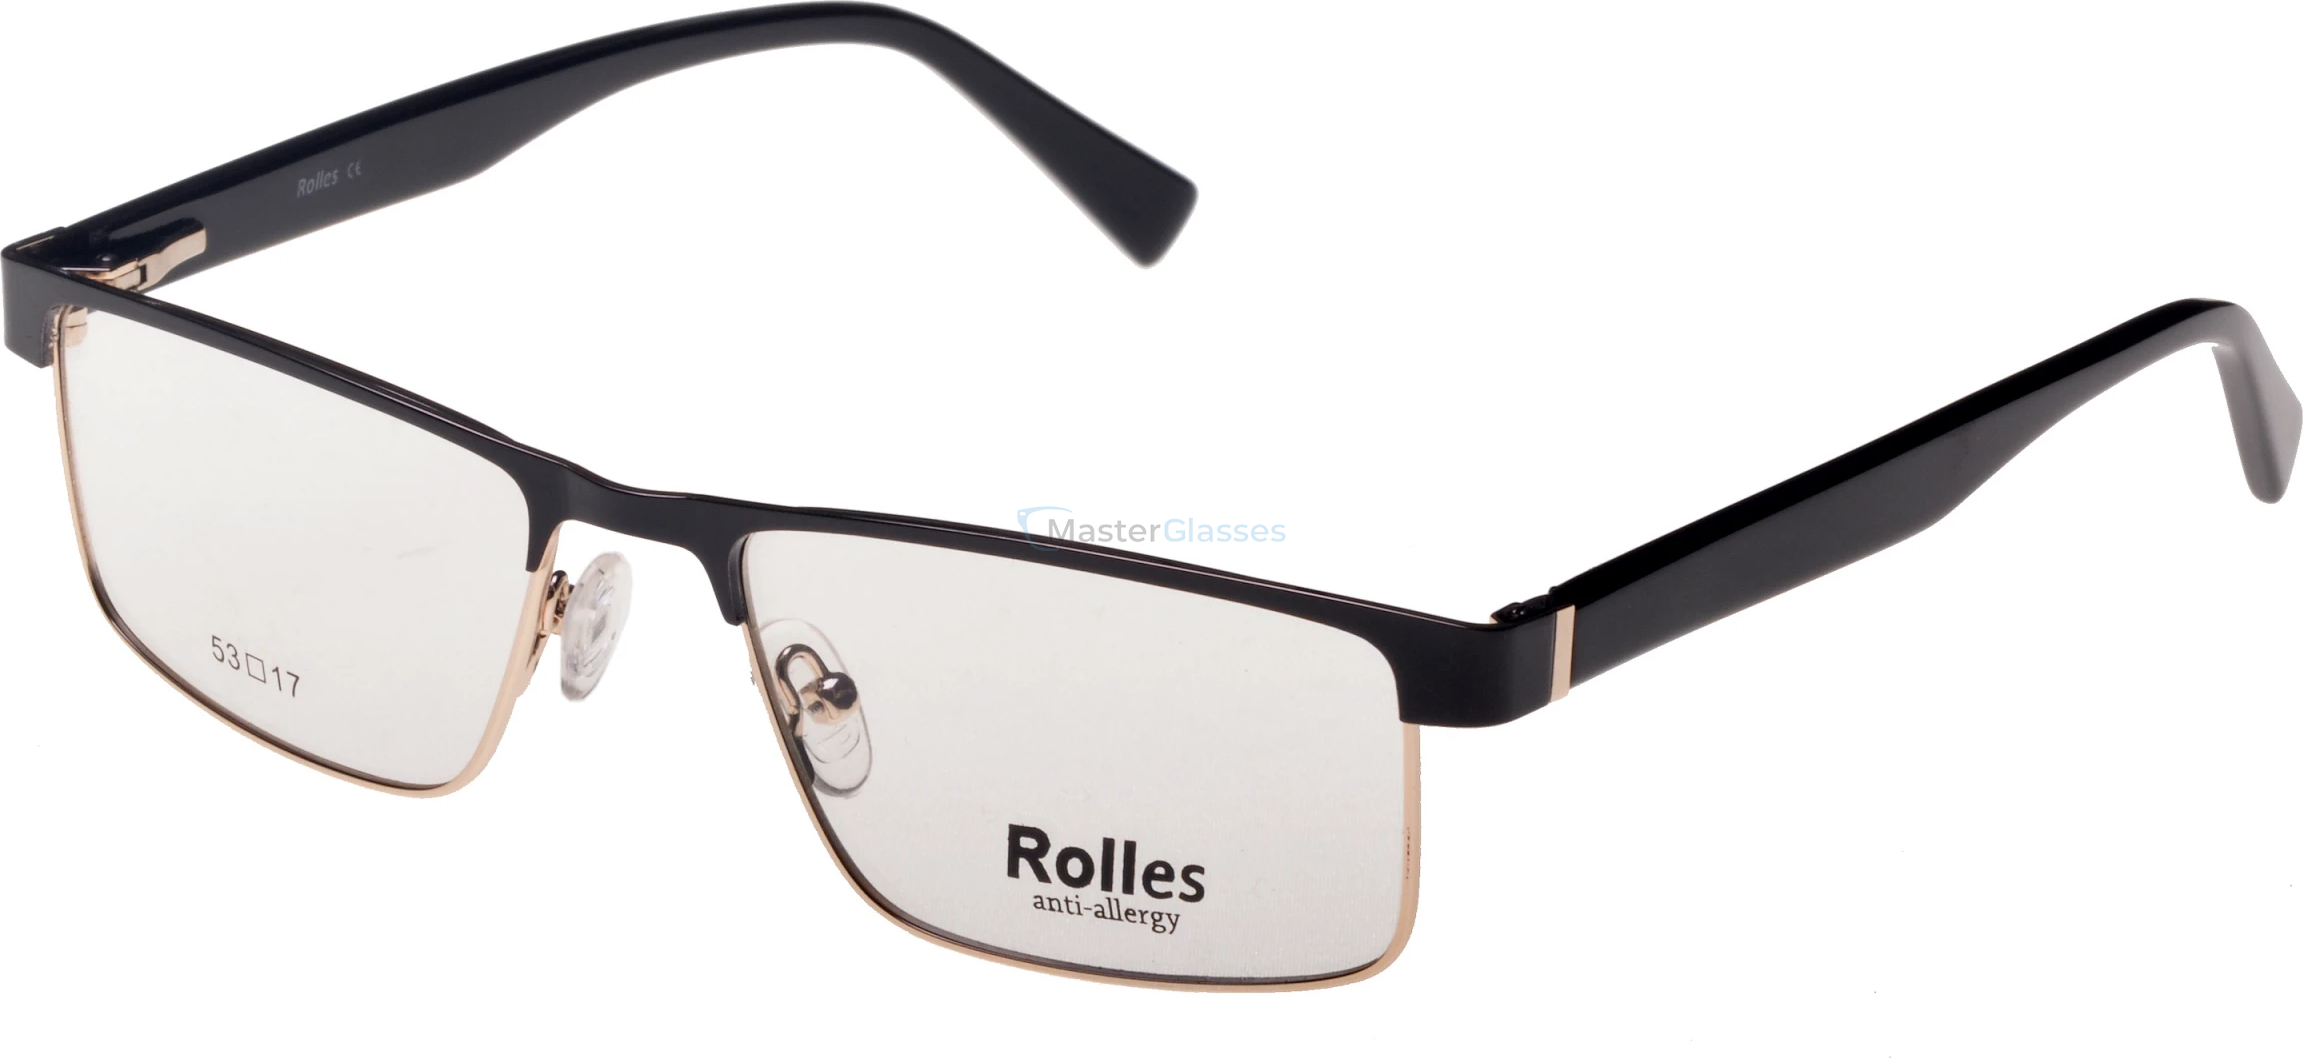  Rolles 606 01